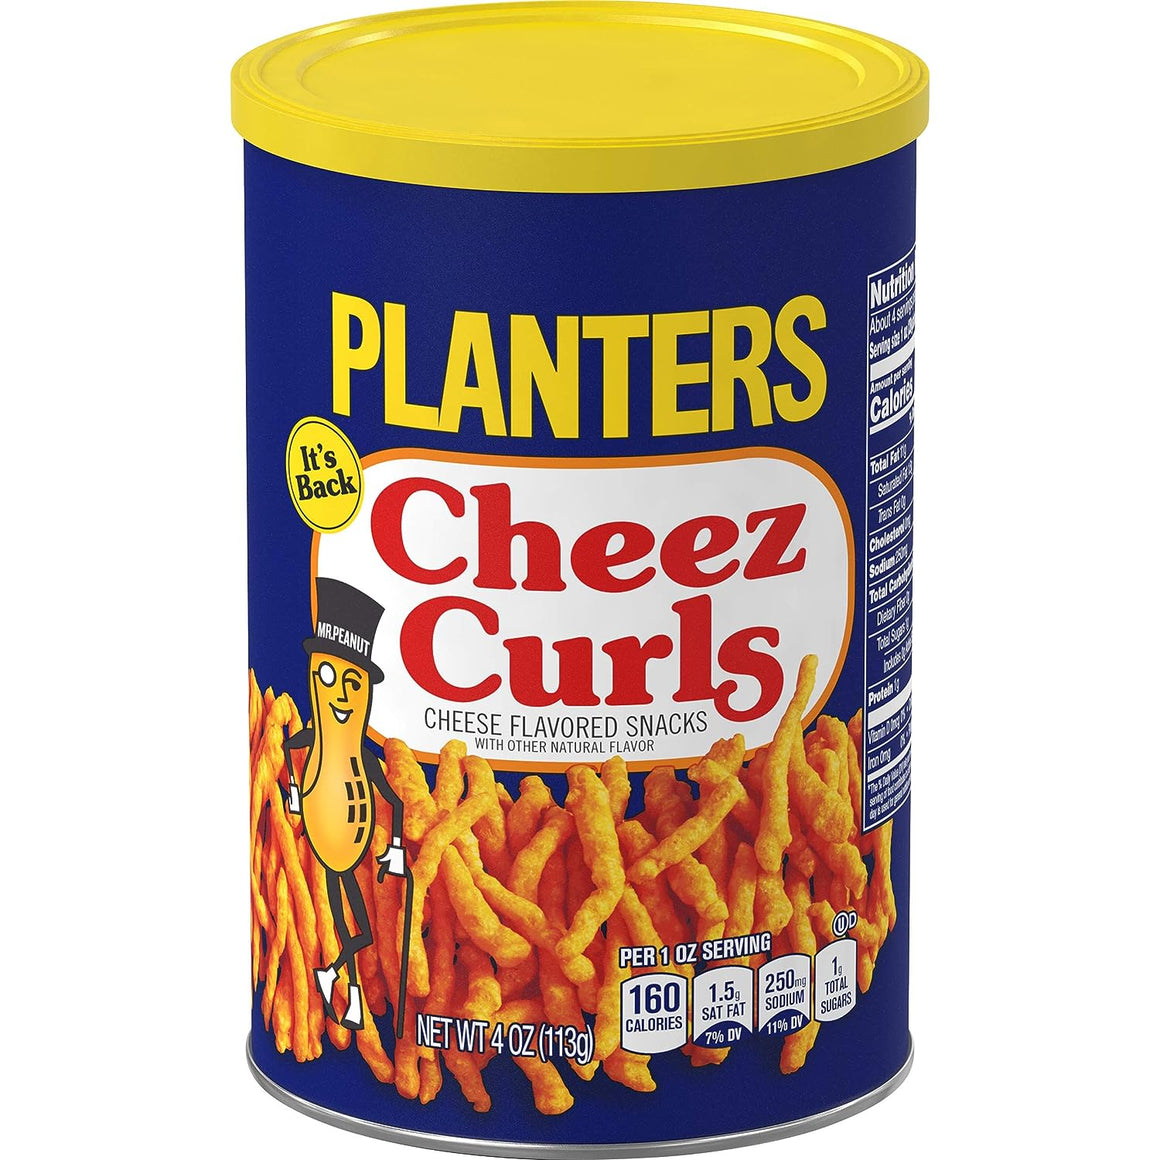 Planters Cheez Curls Cheese Flavored Snacks,Canister 2.75 Oz